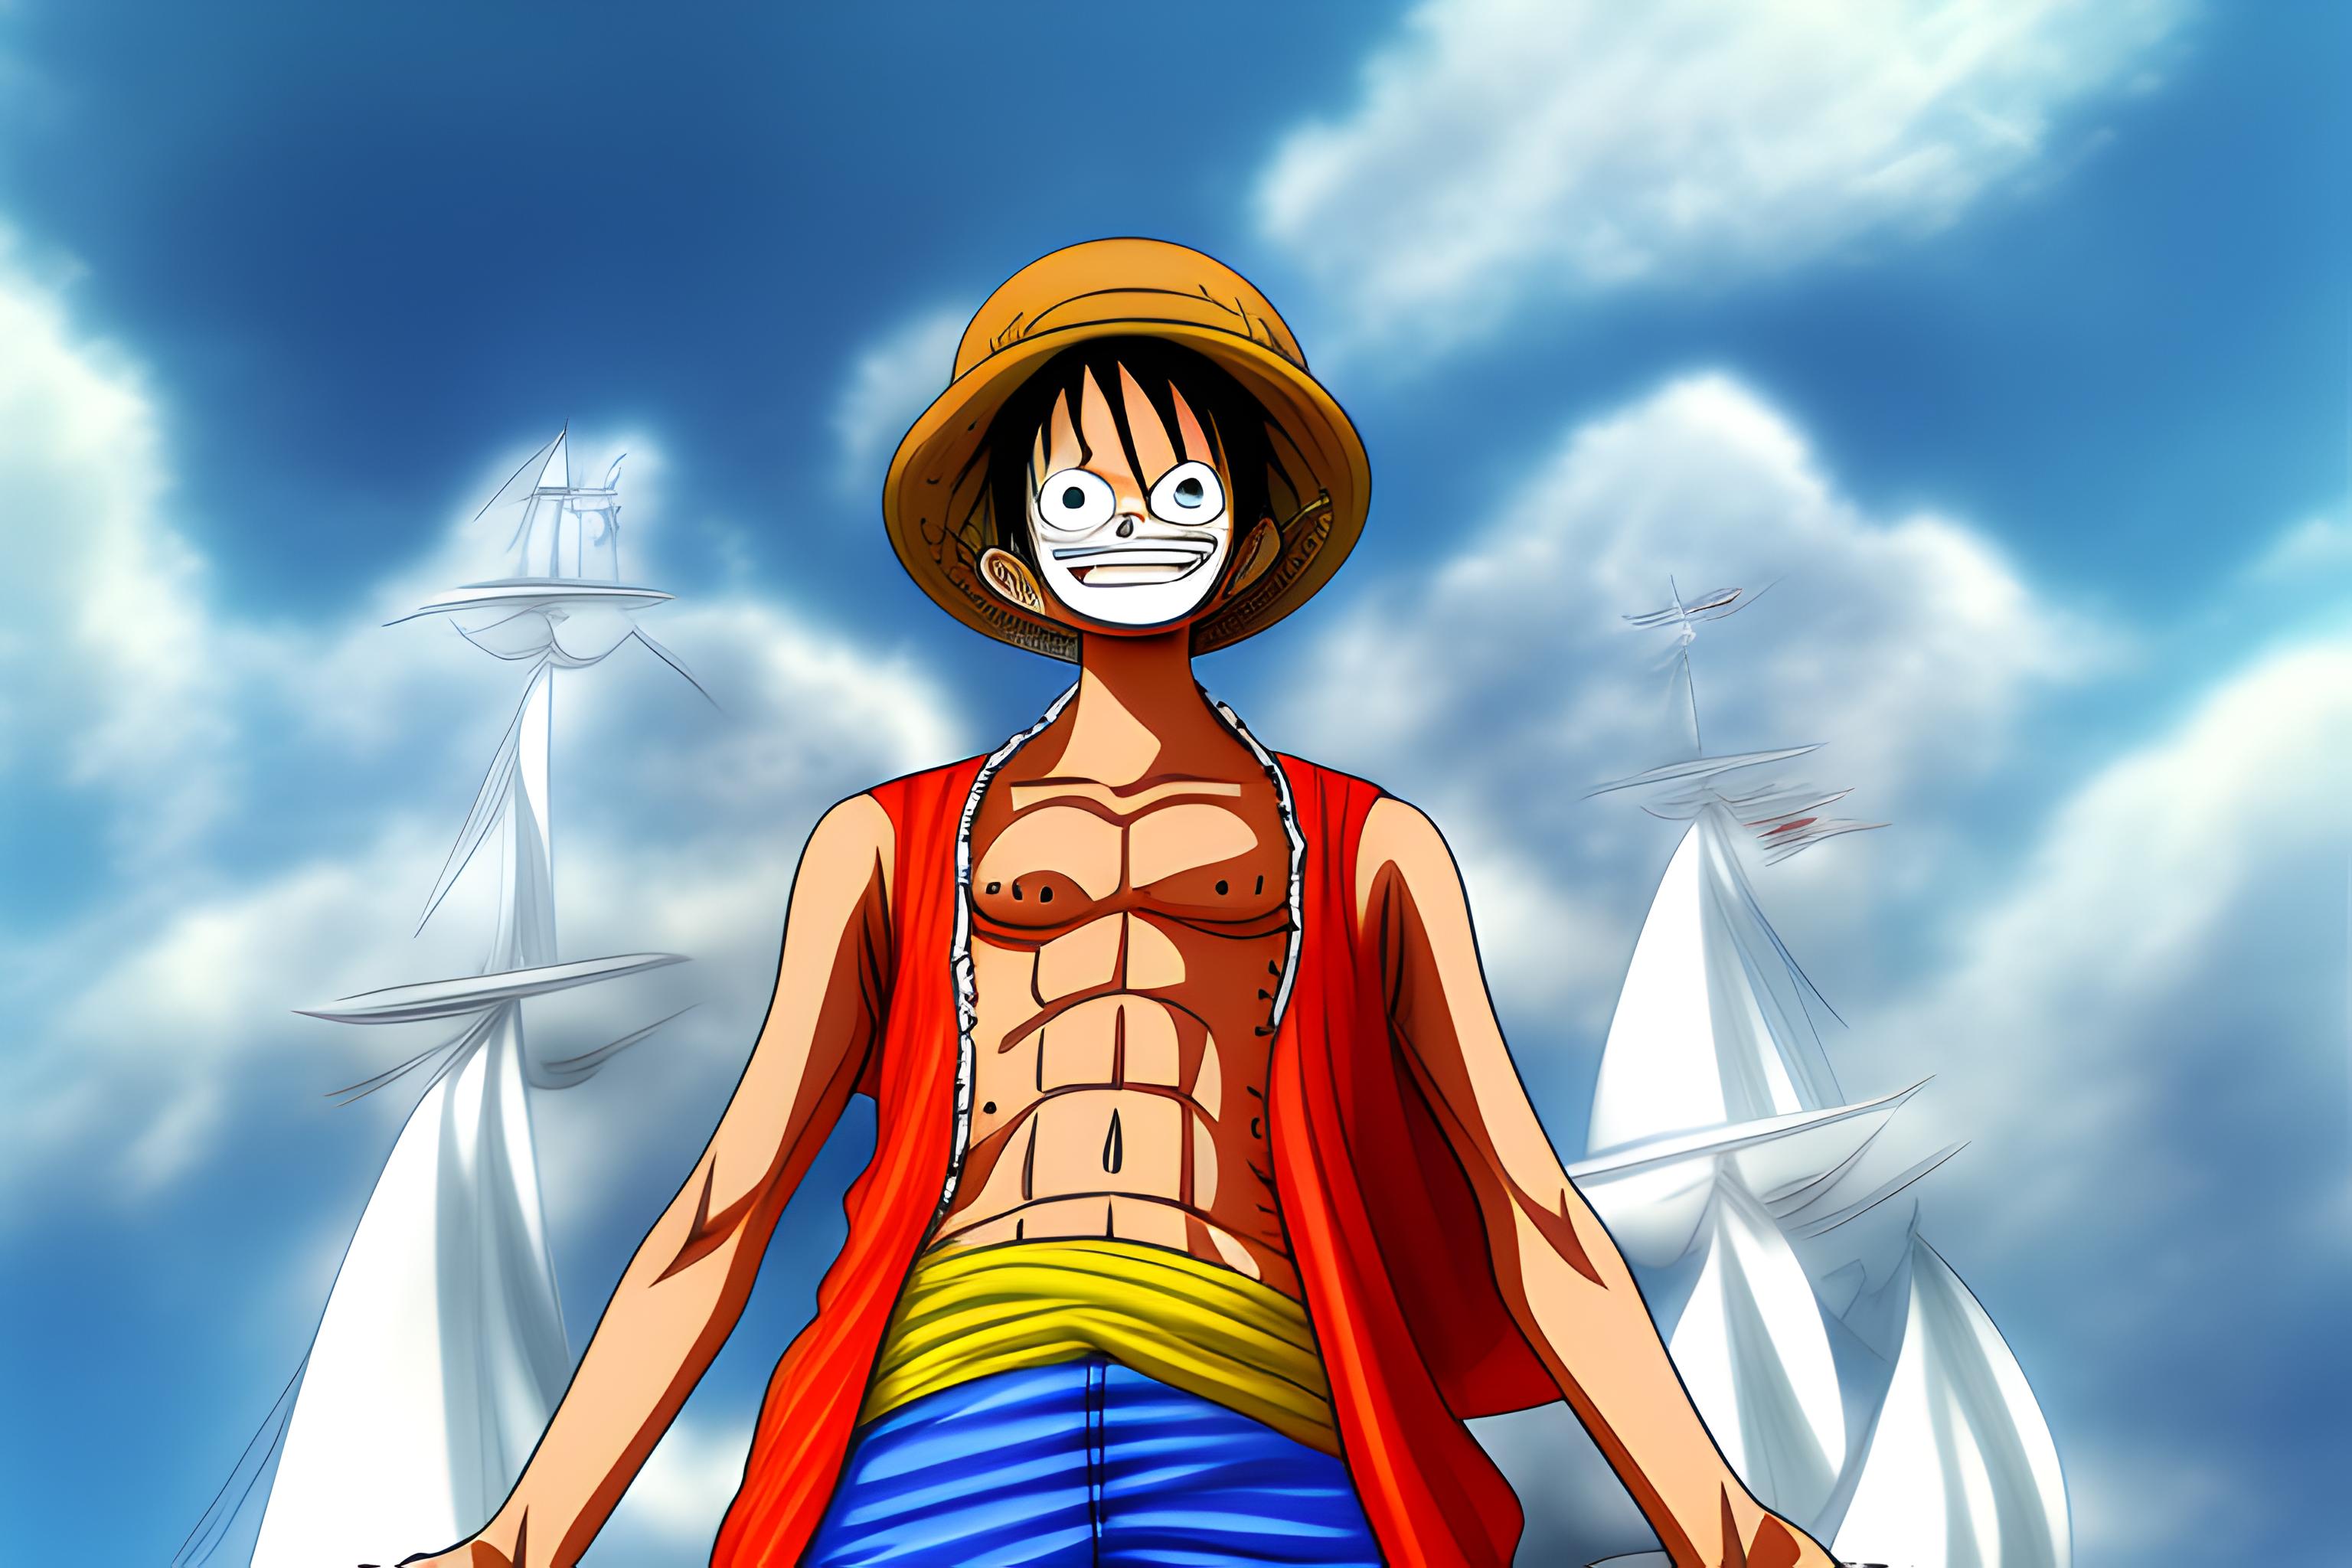 What type of anime is One Piece? - Quora